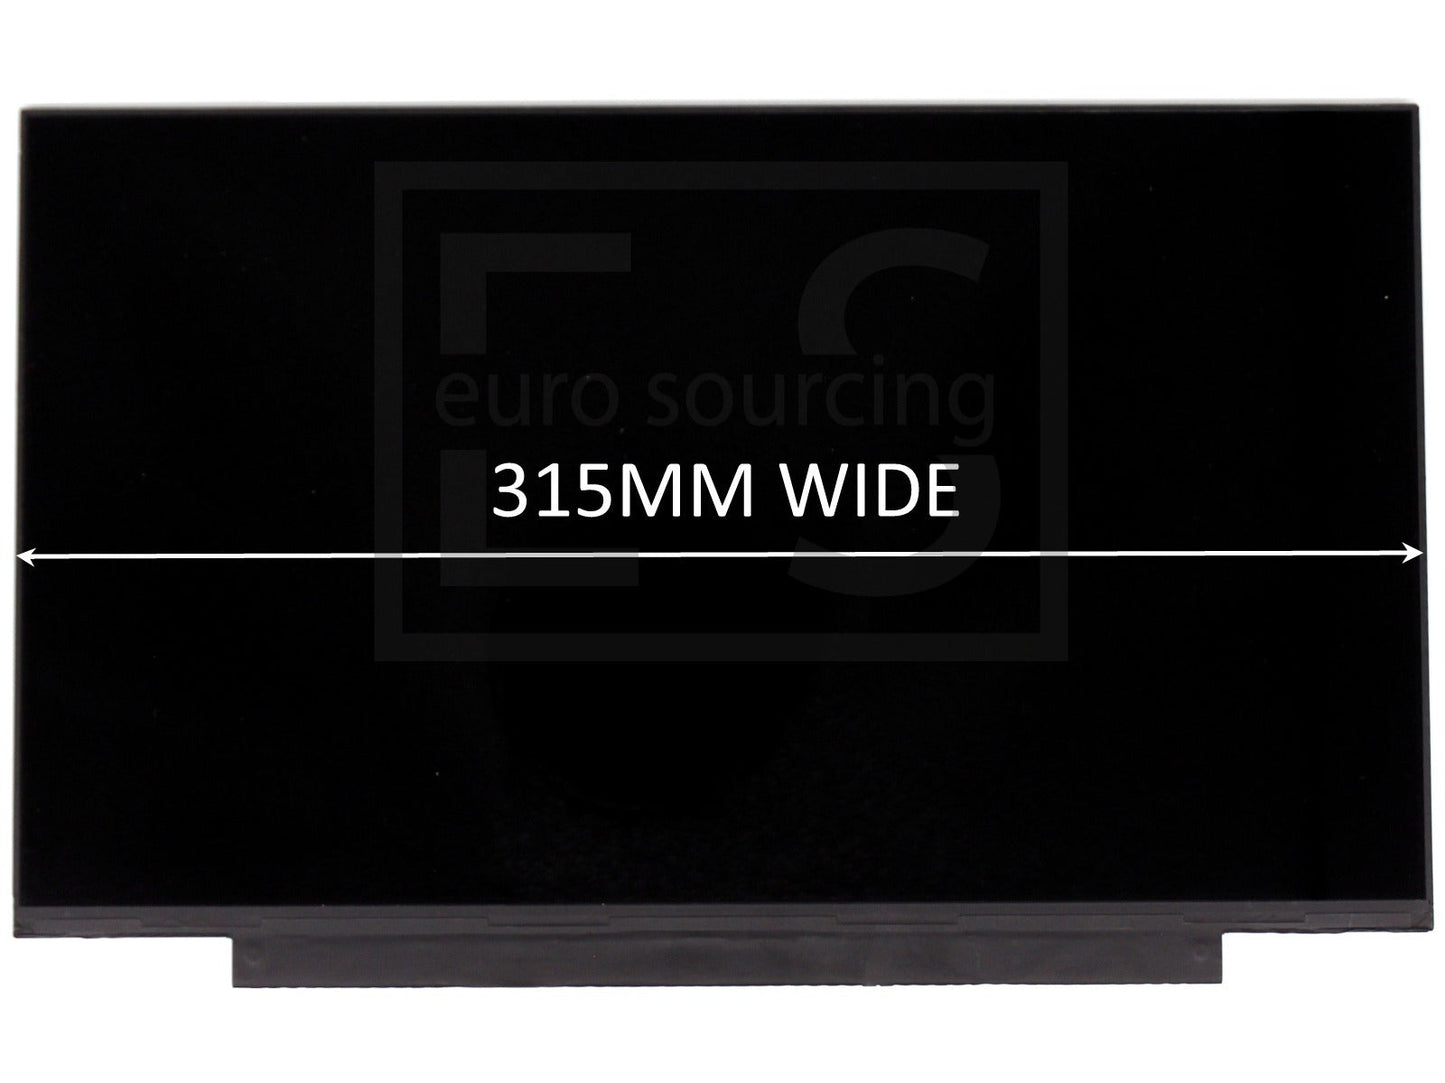 Replacement For N140HGE-EA1 14" LED LCD Screen Matte FHD Non-IPS 315MM Display Panel -Without Brackets Compatible With Auo